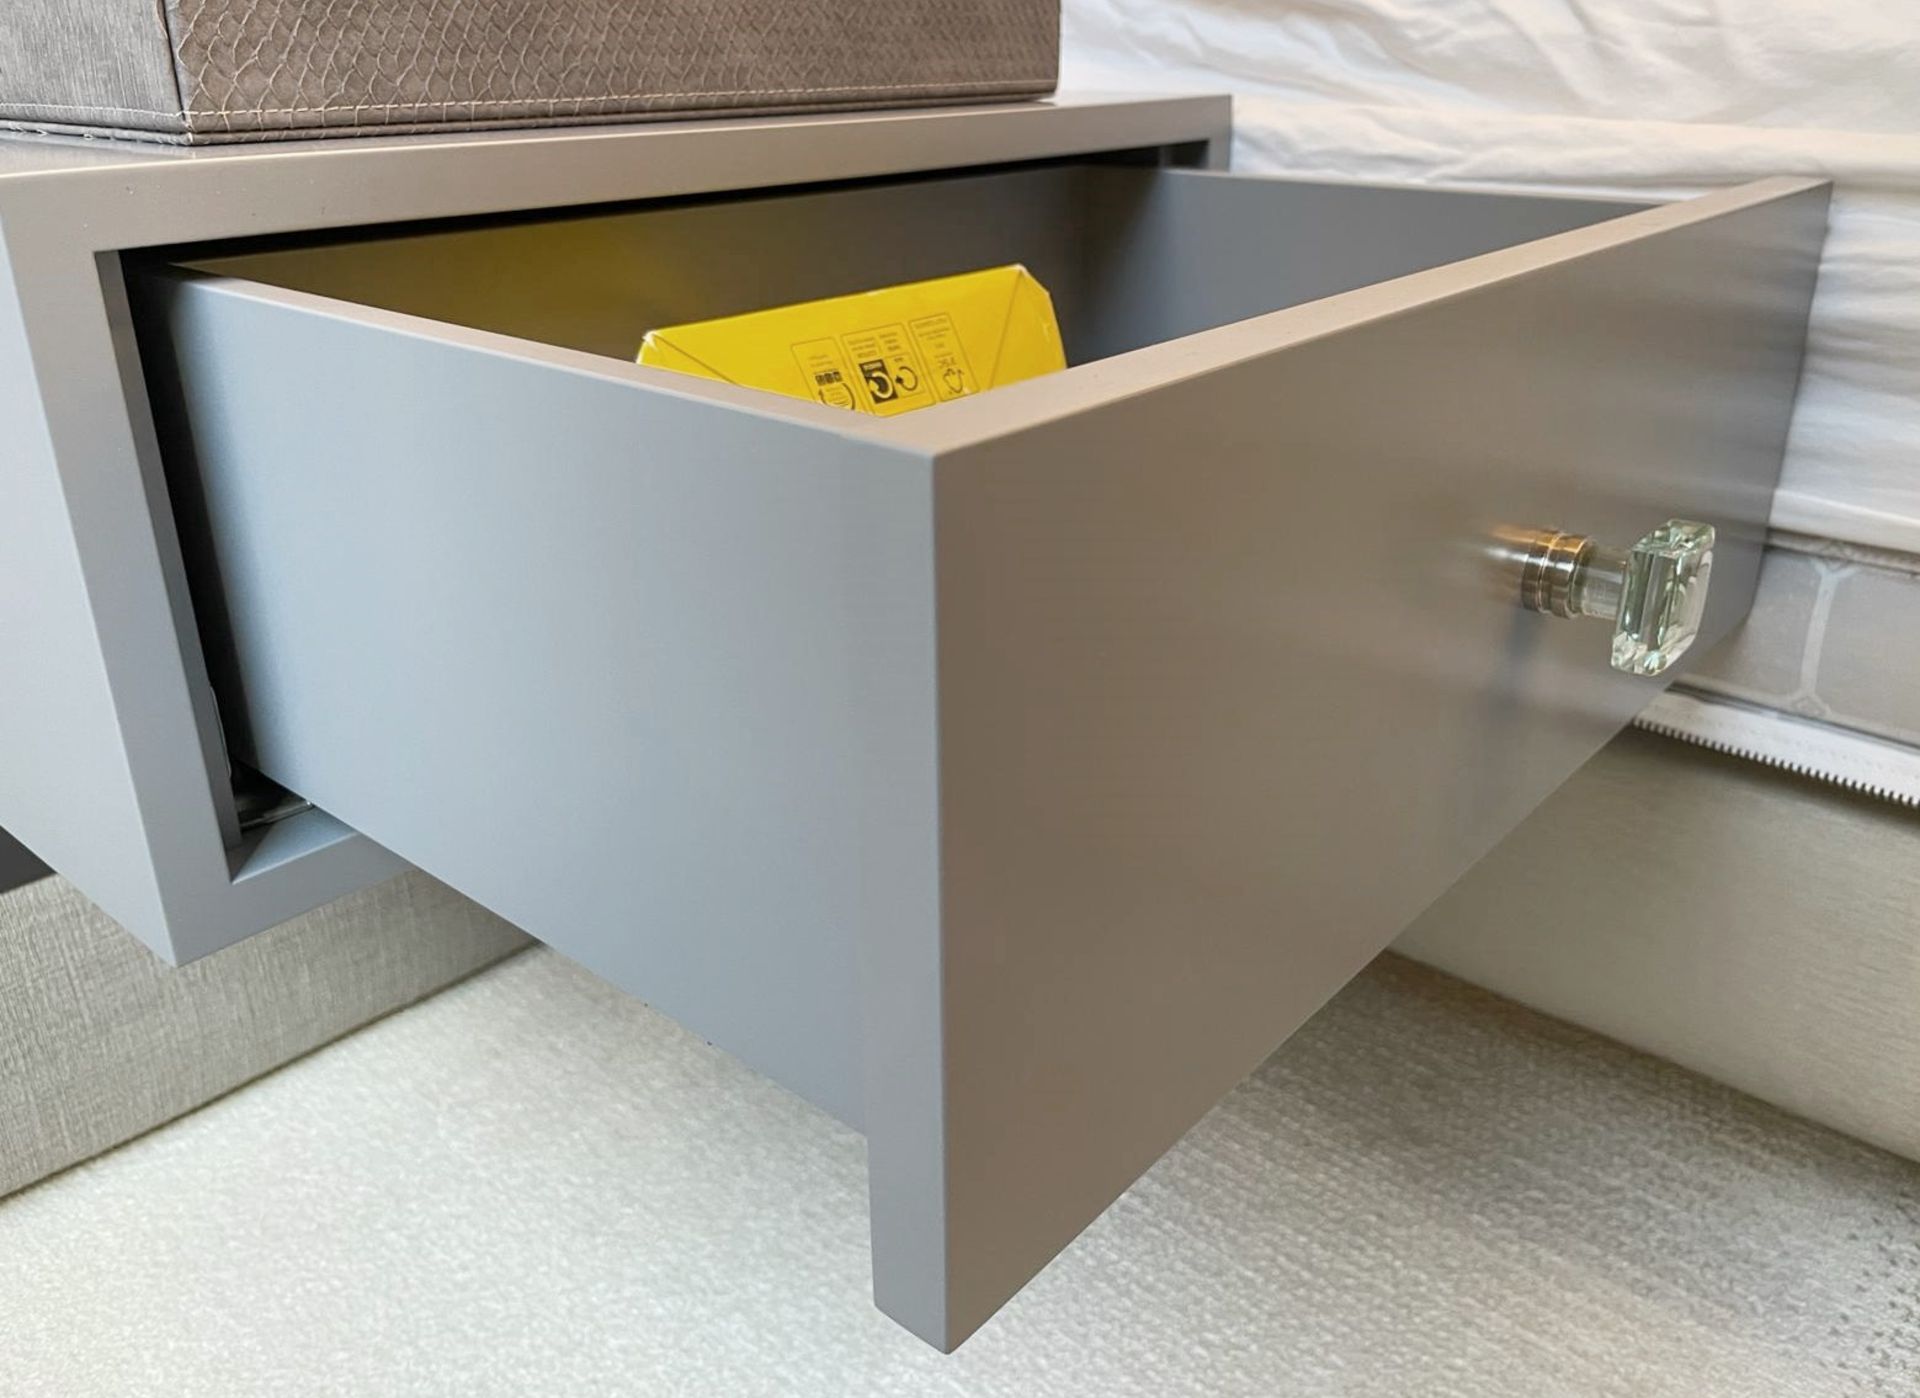 Pair of Stylish Wall Hung Bedside Drawers with a Grey Lacquer Finish and Glass Handles - Image 11 of 14